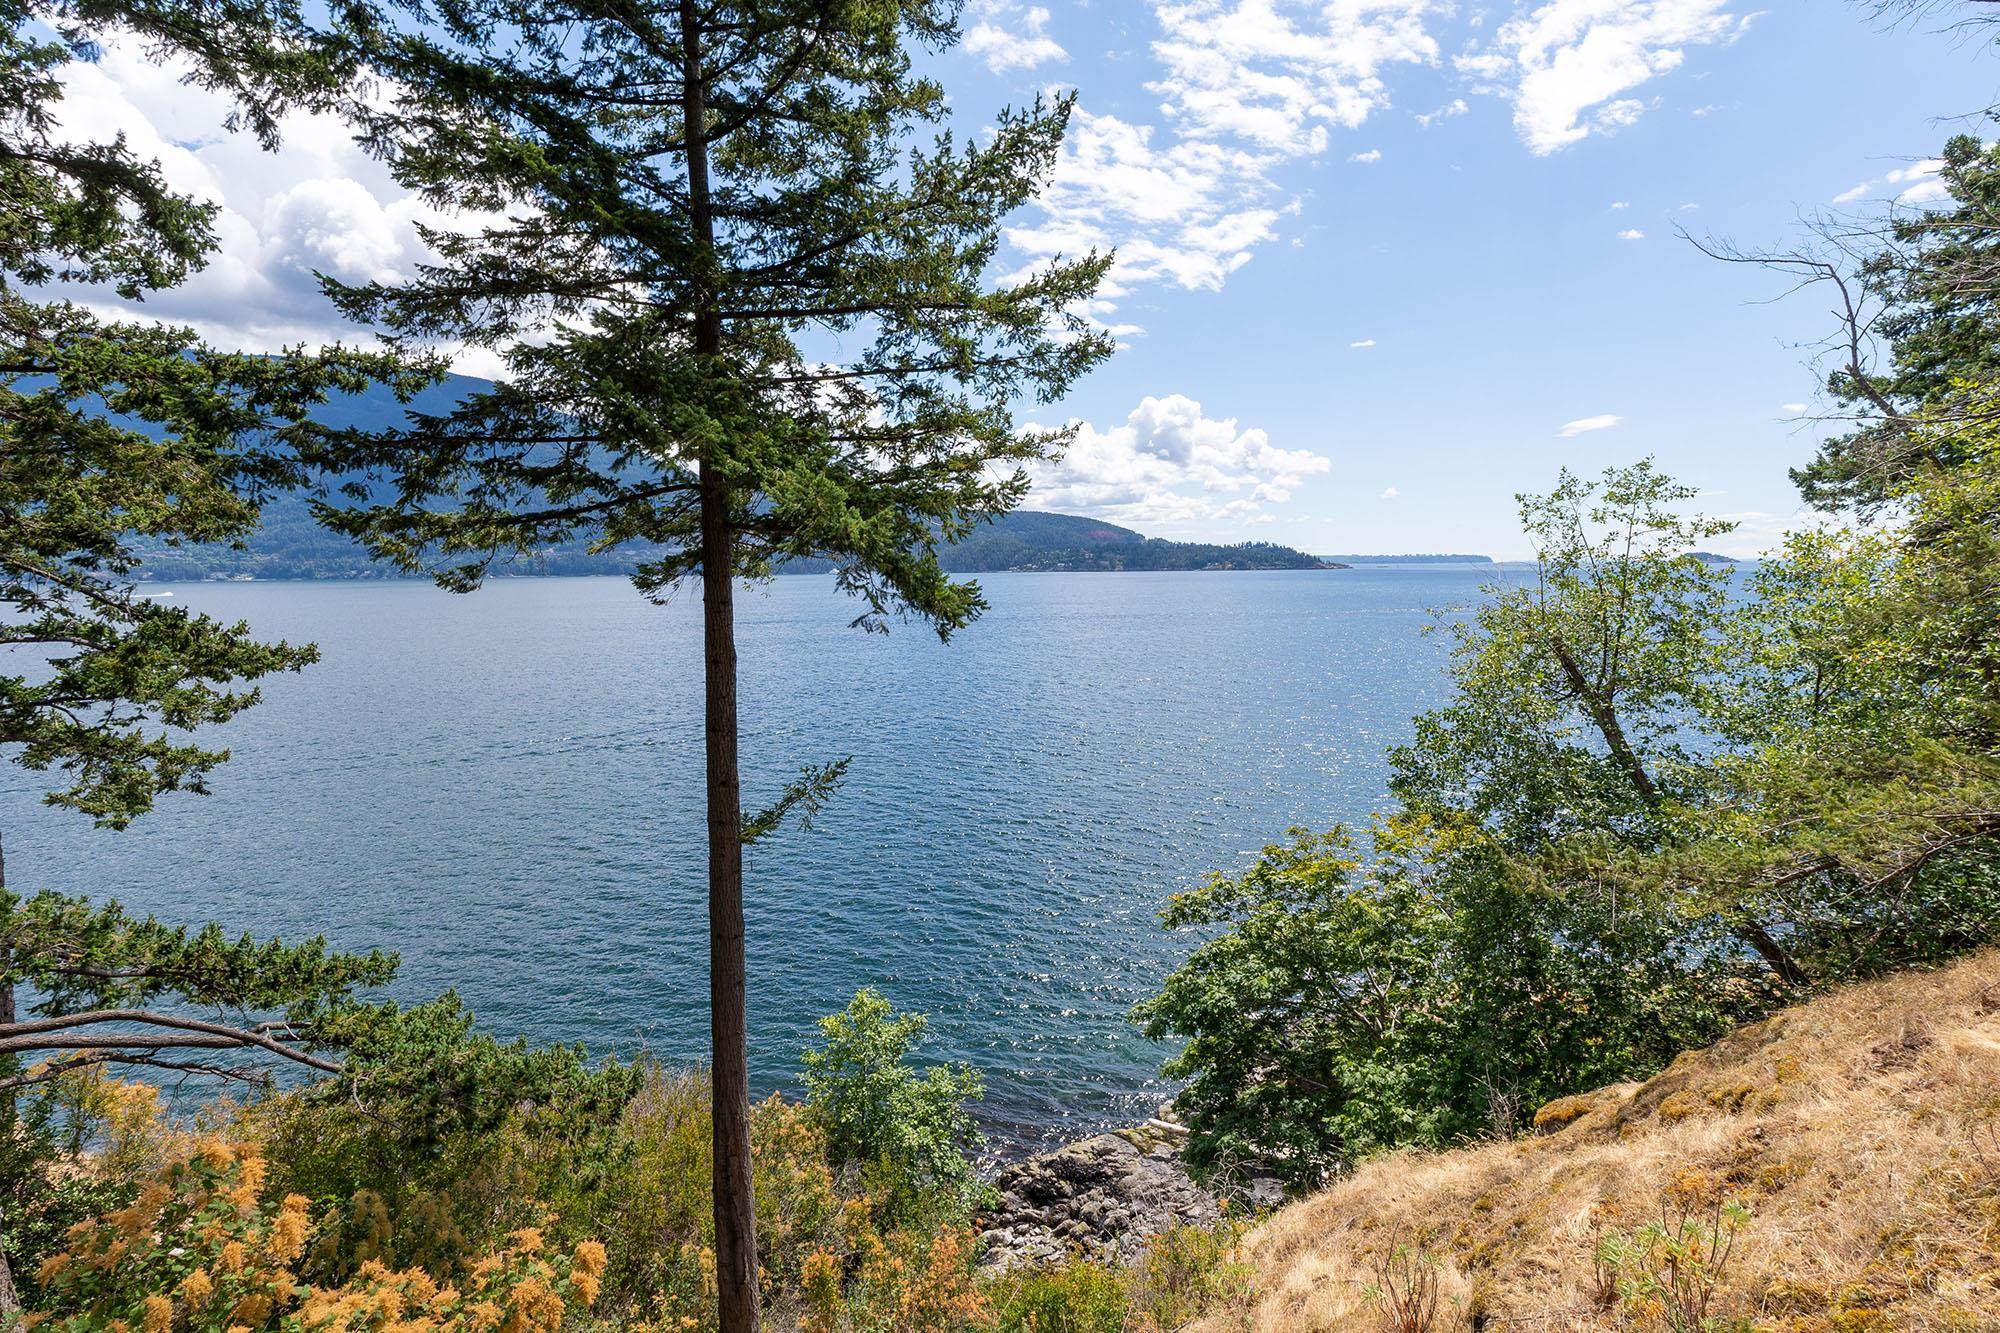 Listing image of 1545 EAGLE CLIFF ROAD